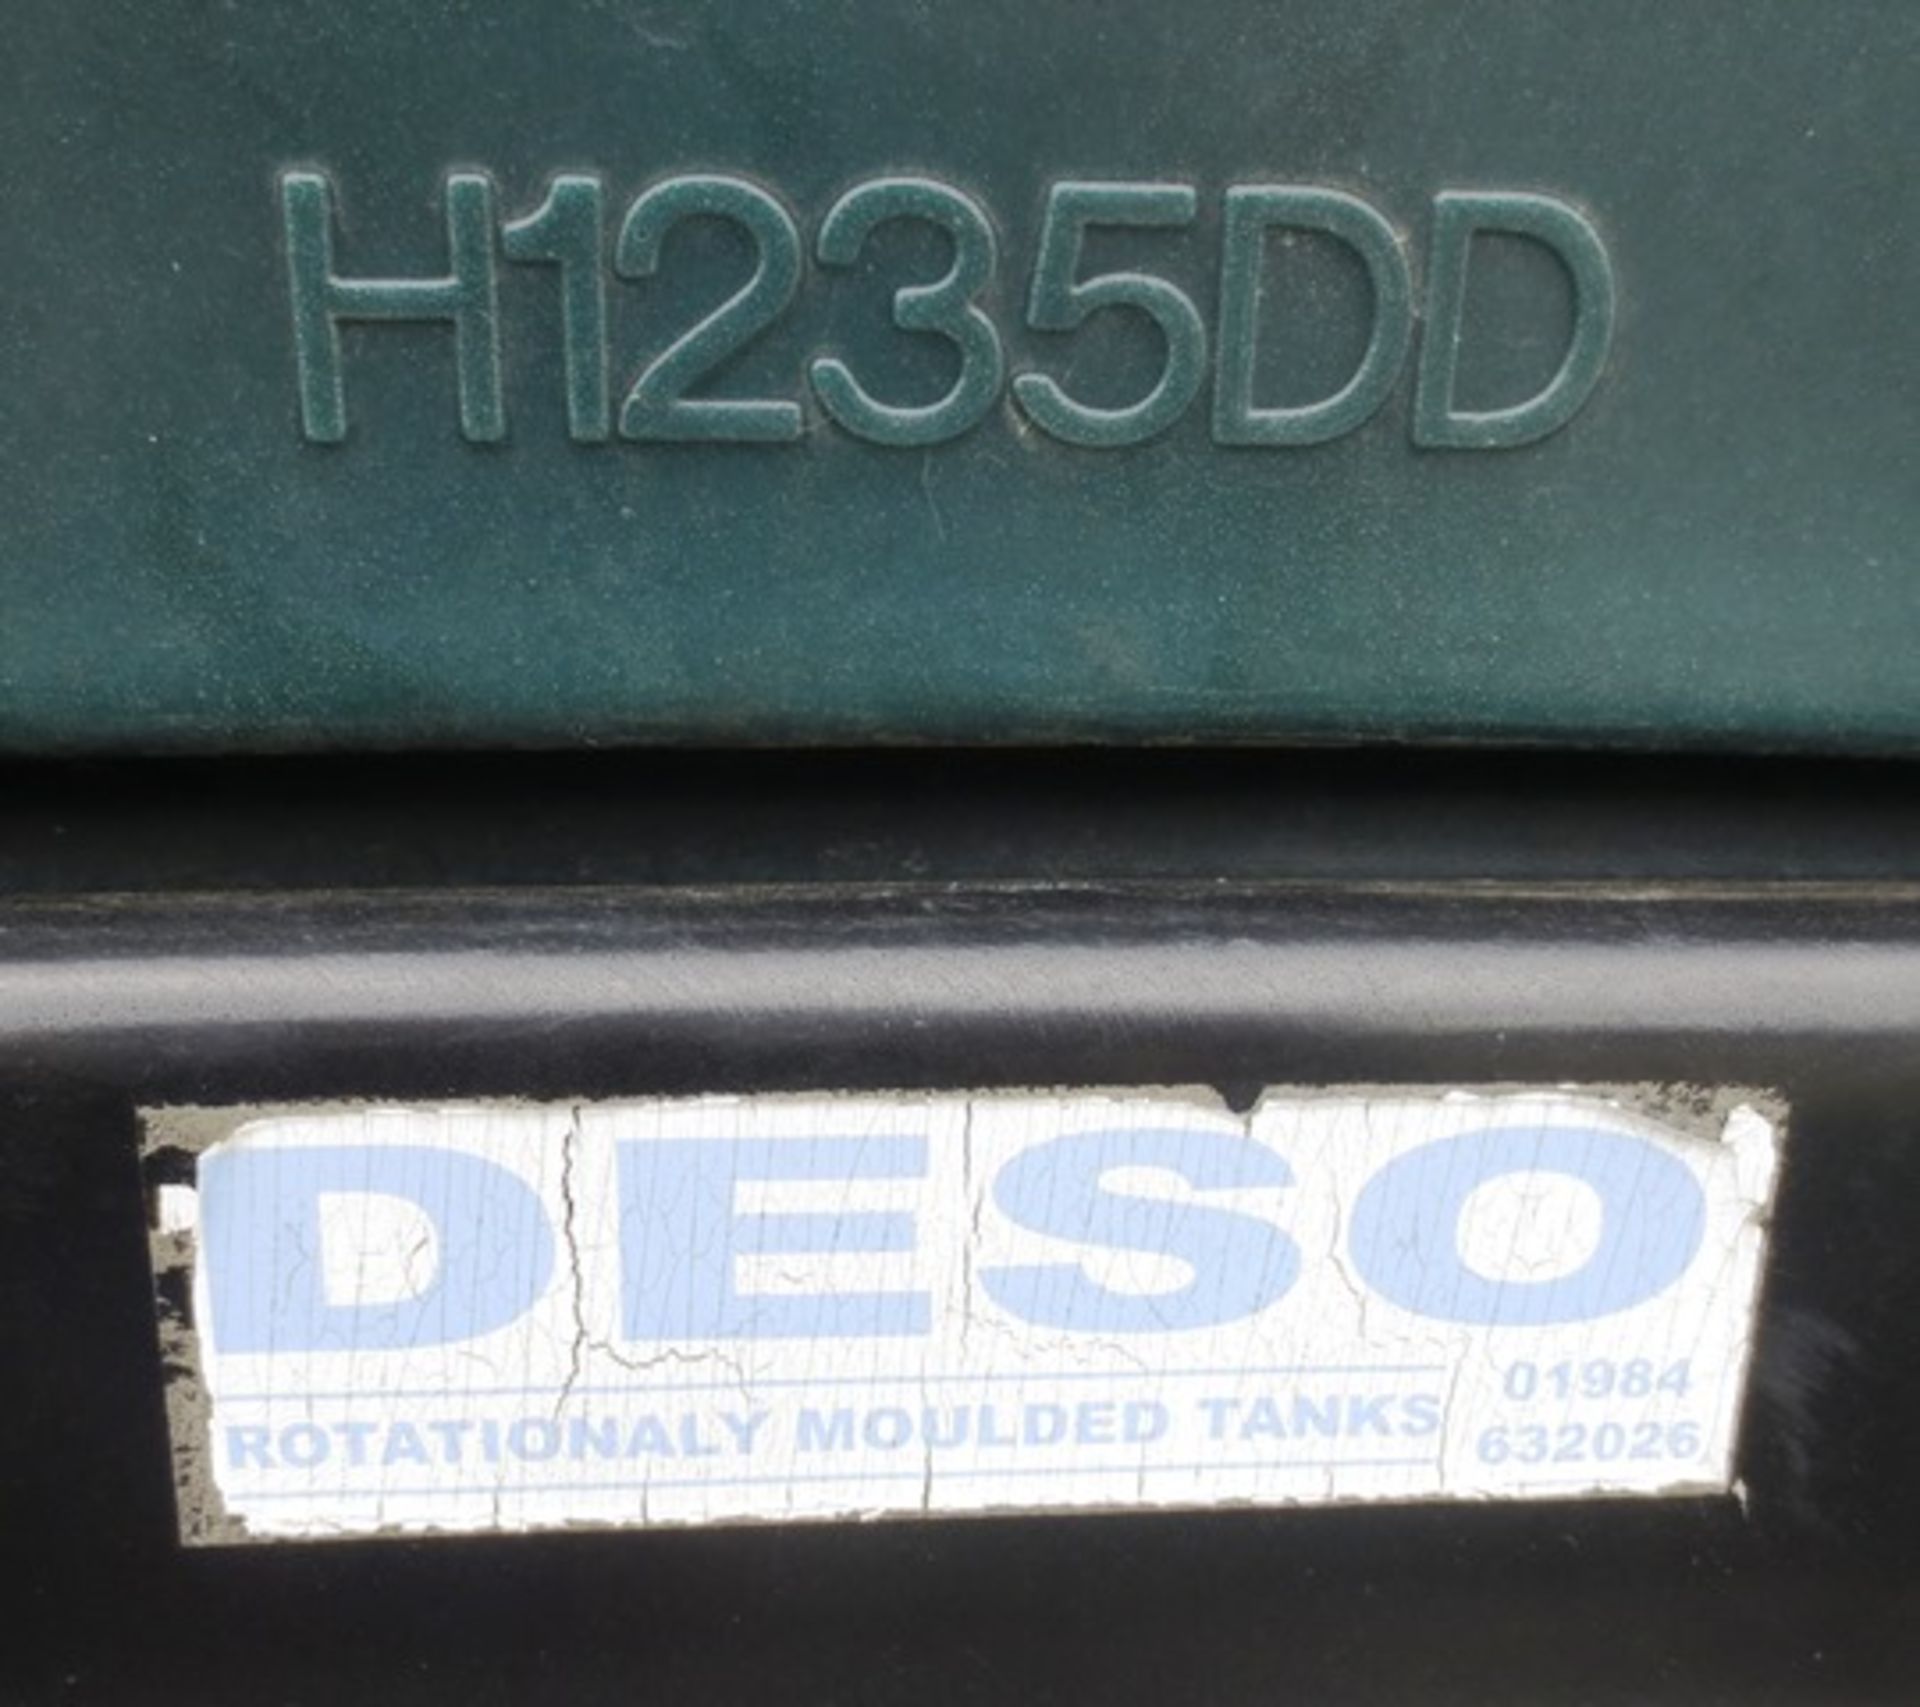 Desco plastic bunded fuel tank, model H1235DD, with dispenser (located at Mill Street, South Molton, - Image 3 of 3